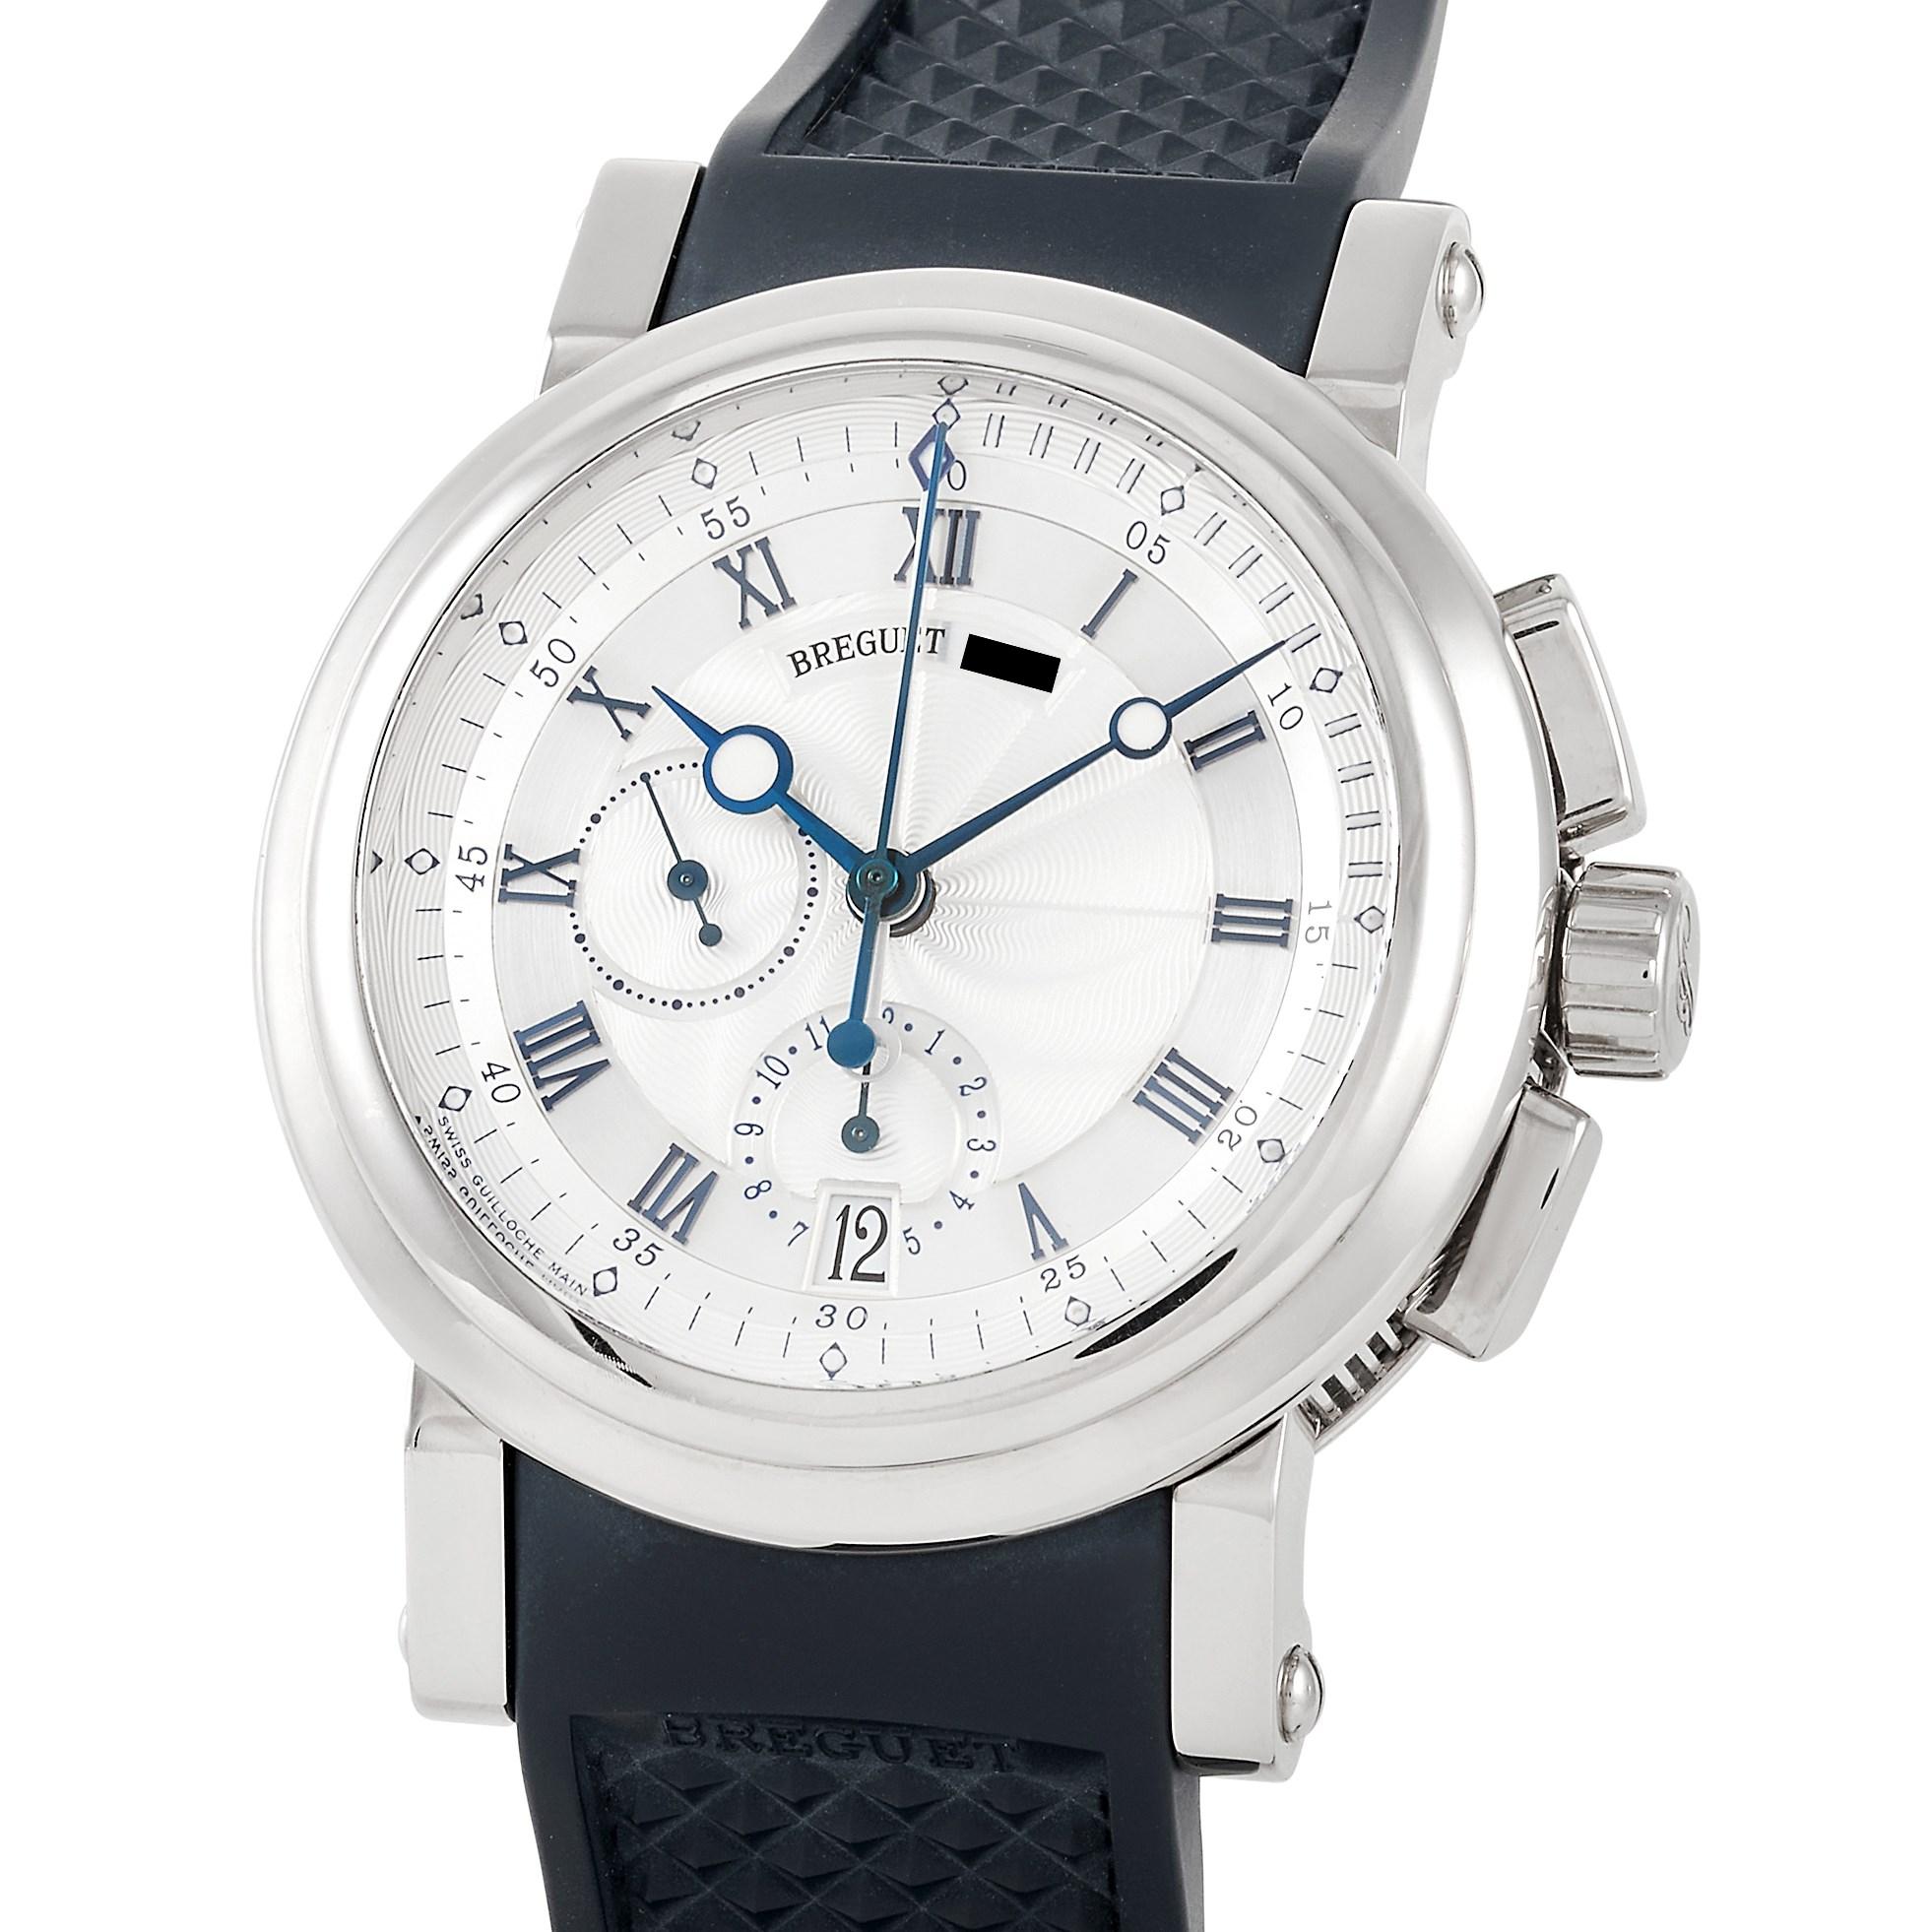 This Breguet Breguet Marine Royal Chronograph 48 mm Stainless Steel Watch, reference number 5827BB/12/5ZU, comes with a stainless steel case that measures 48 mm in diameter. The case is presented on a blue rubber strap. The transparent case back